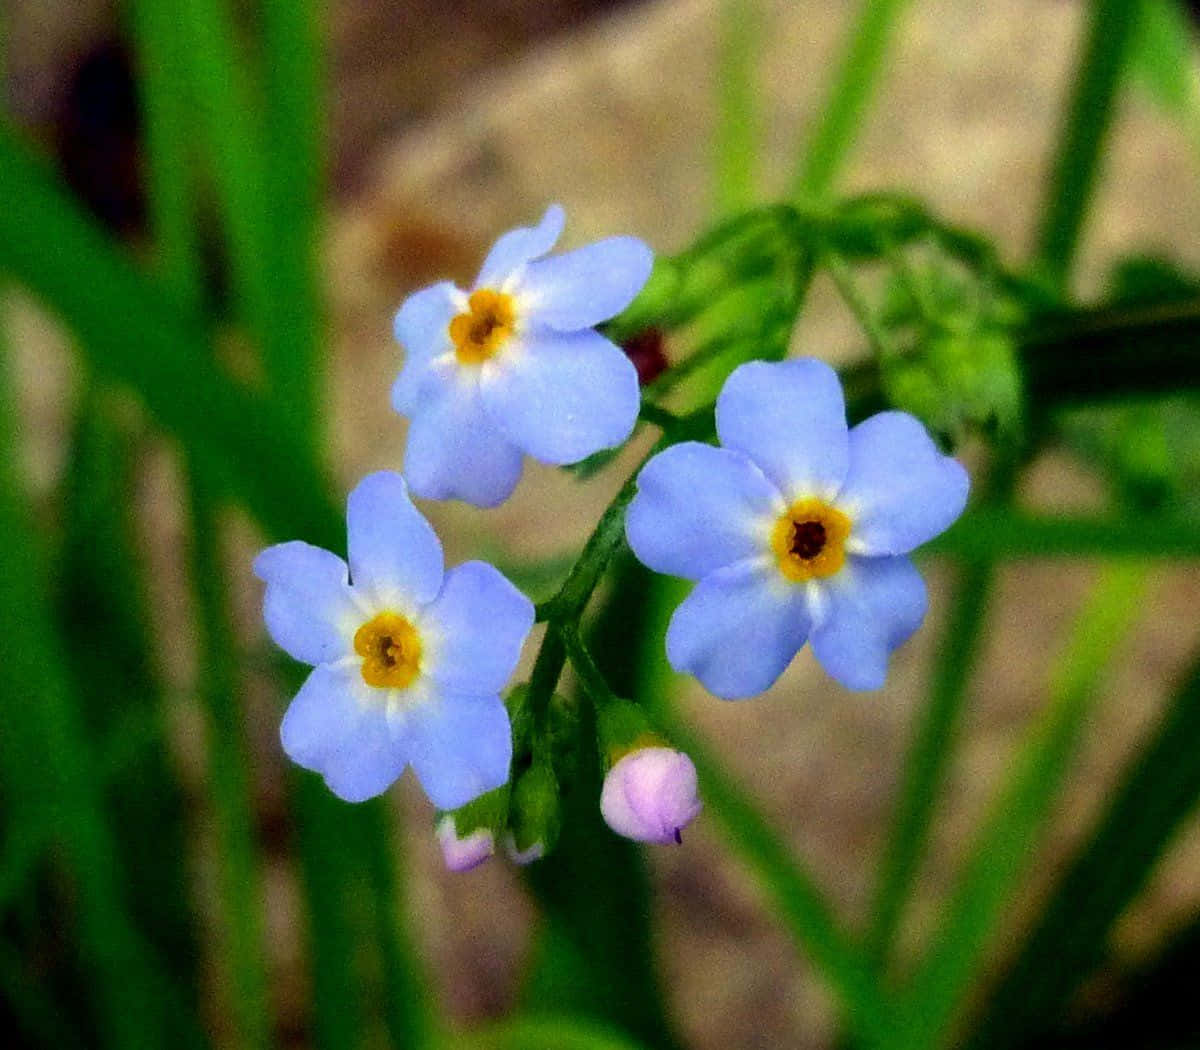 A delightful reminder - the Forget Me Not flower.